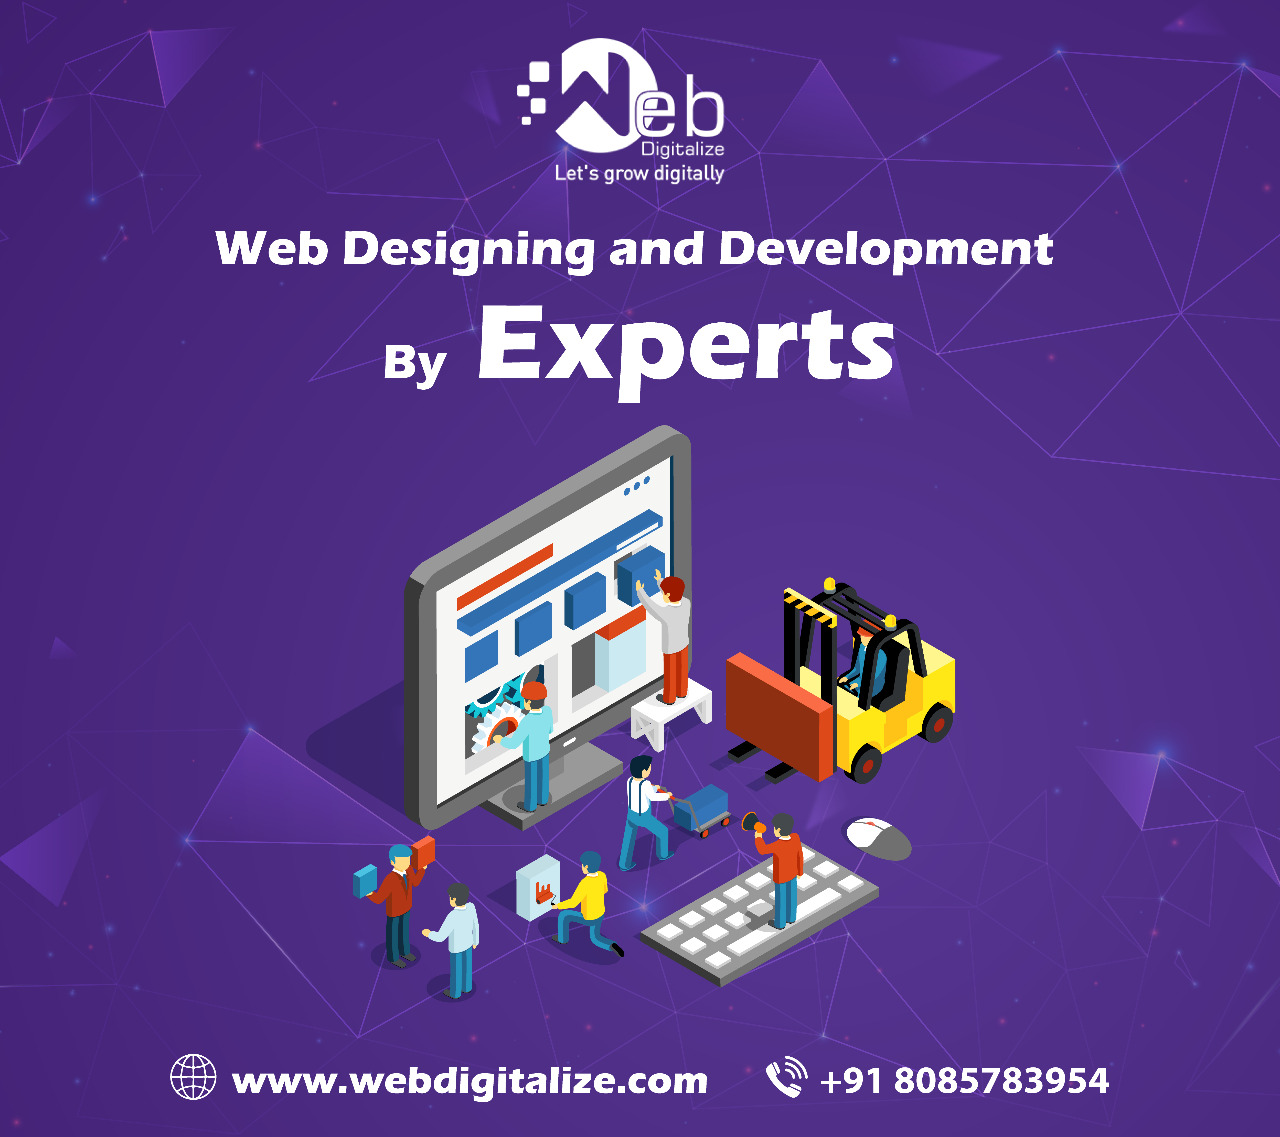 Web Designing and Development by experts